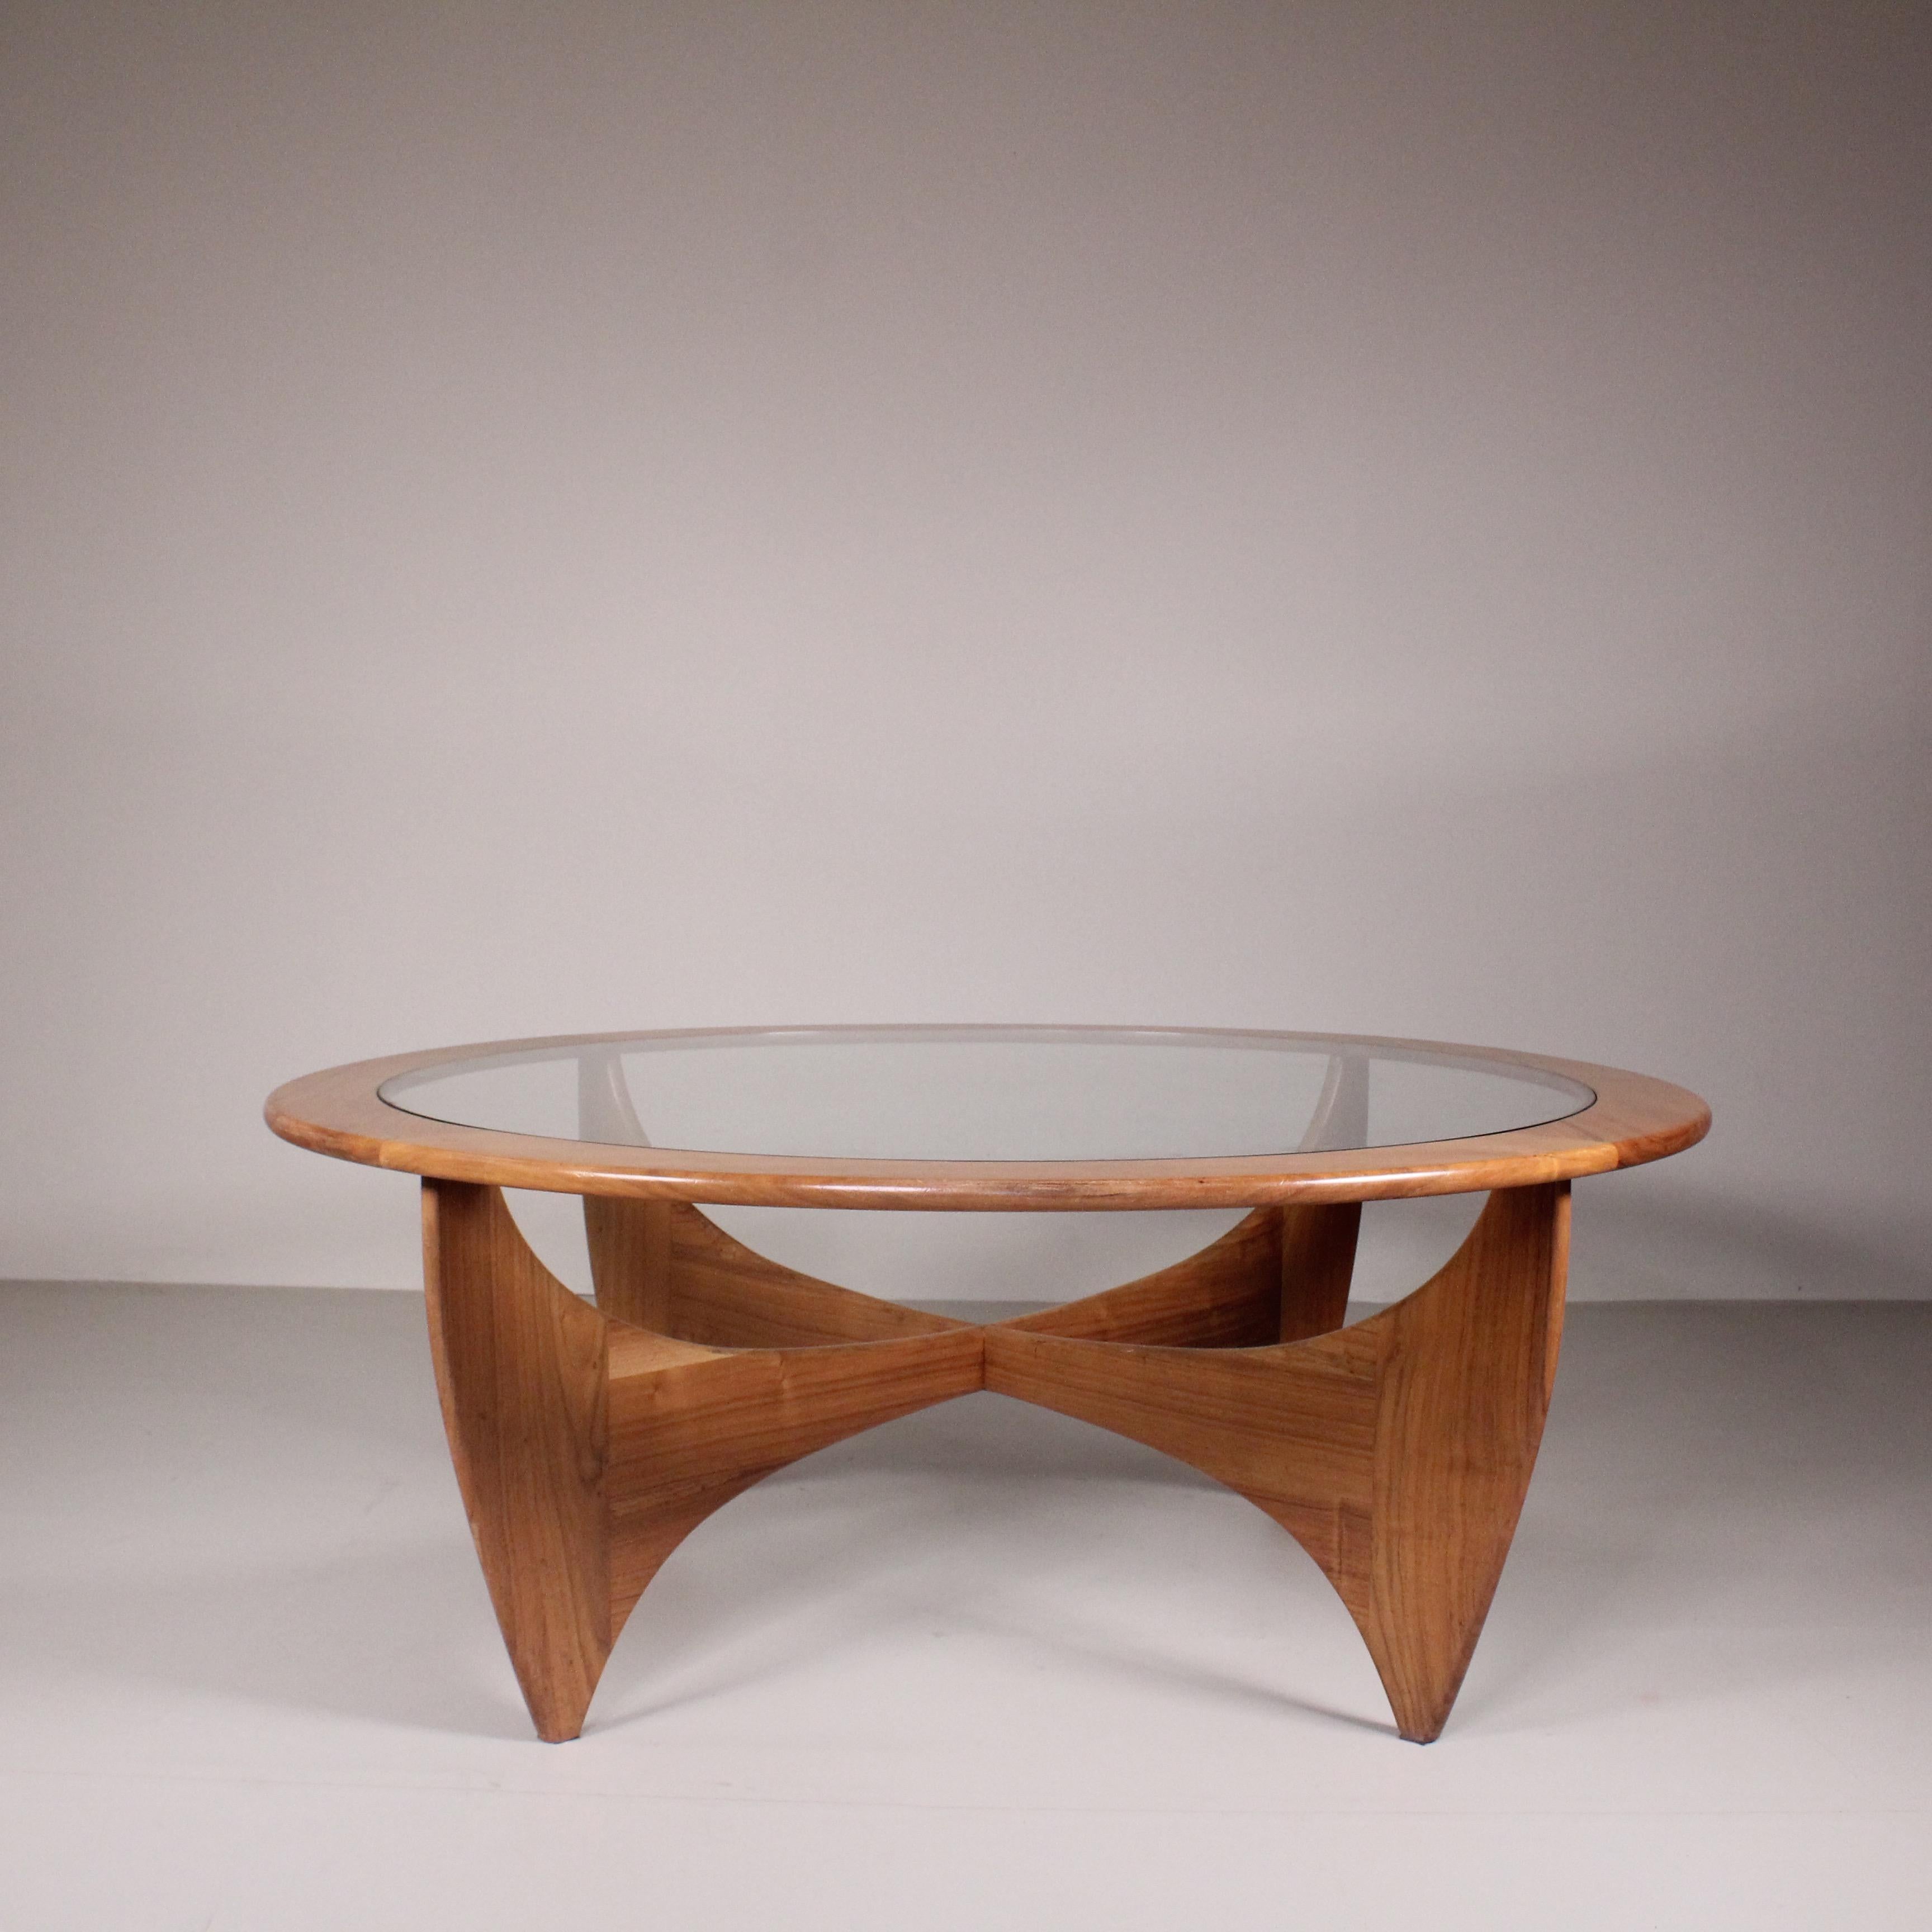 The Astro Coffee Table by Victor Wilkins for G Plan, a quintessential piece from the 1960s, encapsulates the era's iconic design ethos. Crafted with meticulous attention, the table features a striking astrological-inspired design with organic,